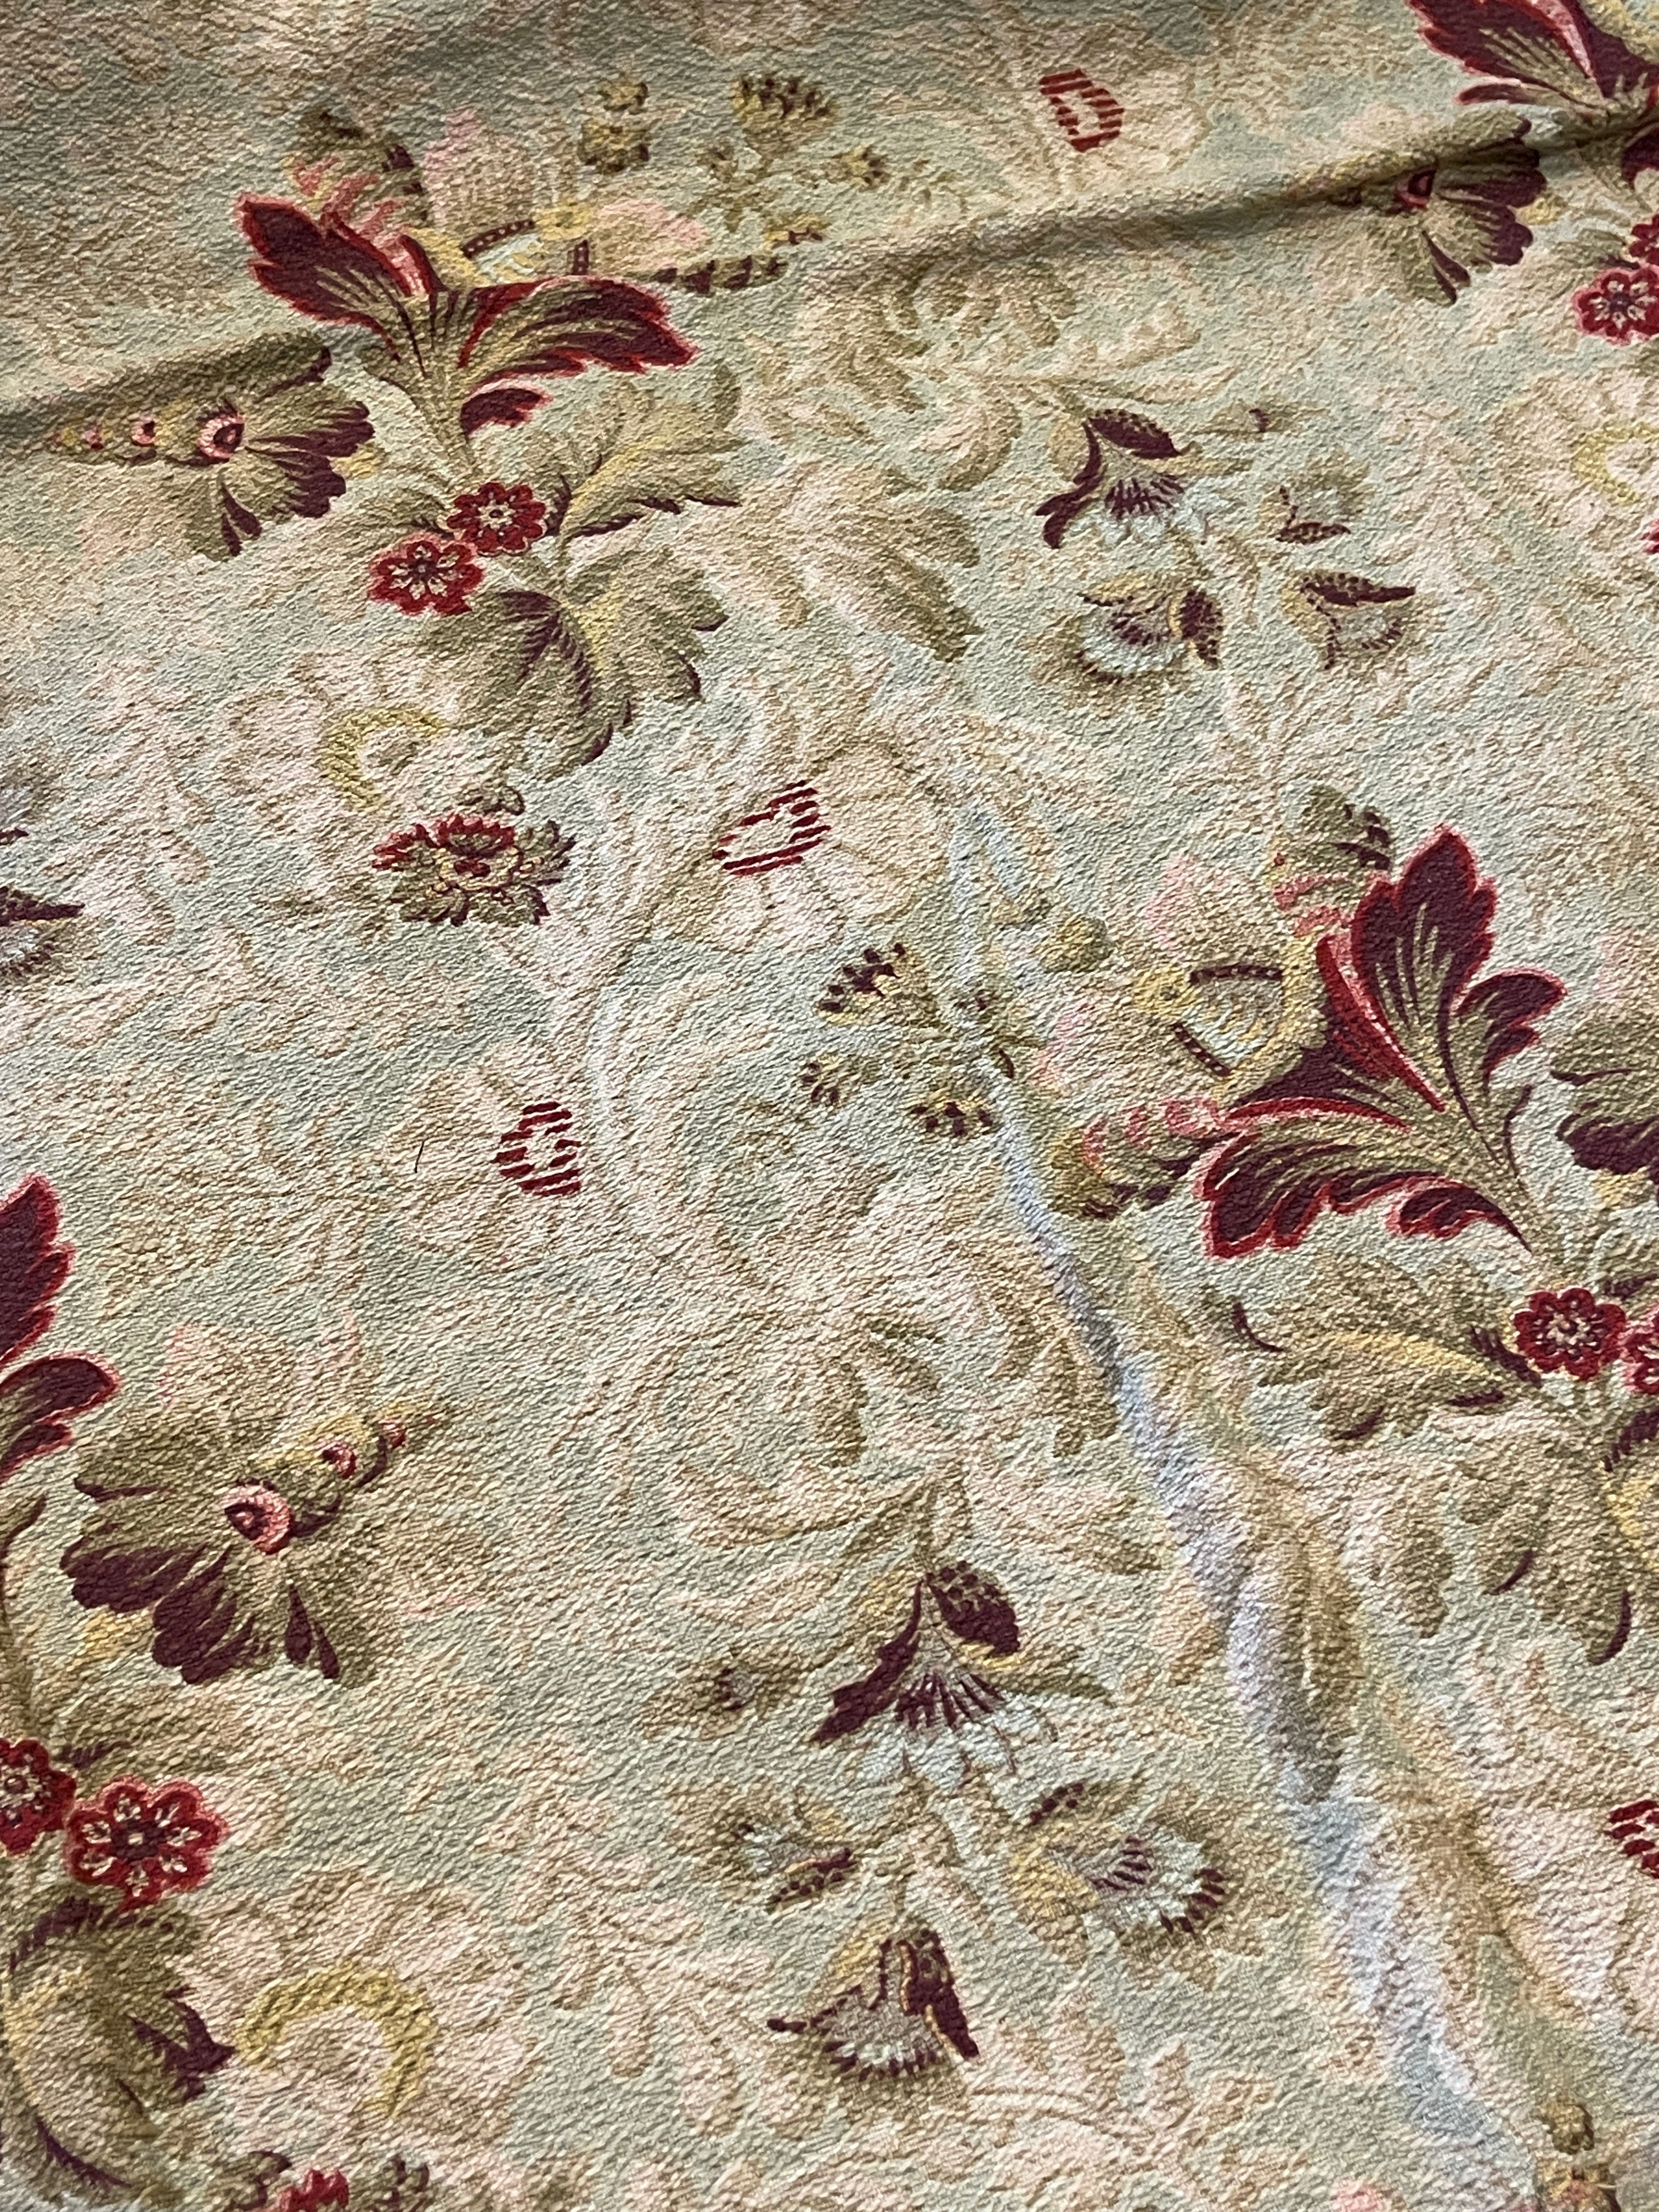 Antique 1800's French Textured Cotton Weave